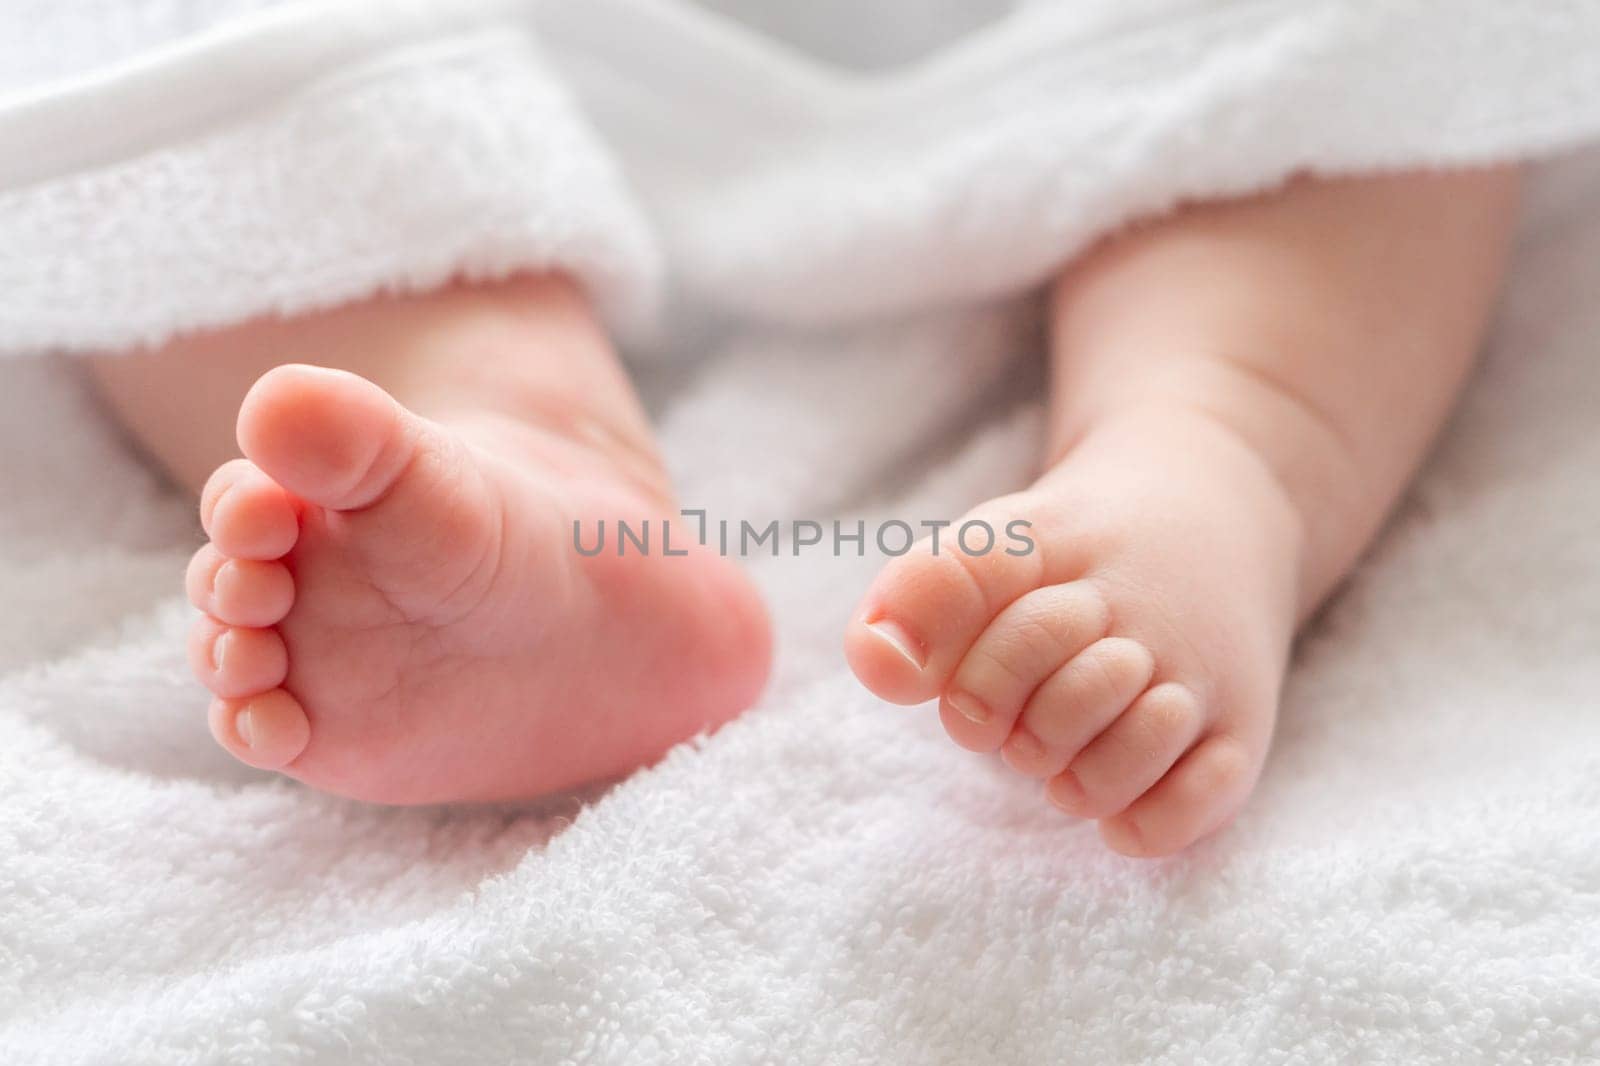 Beneath the luxurious softness of a white towel, an infant's feet and legs emerge, symbolizing gentle care after a bath